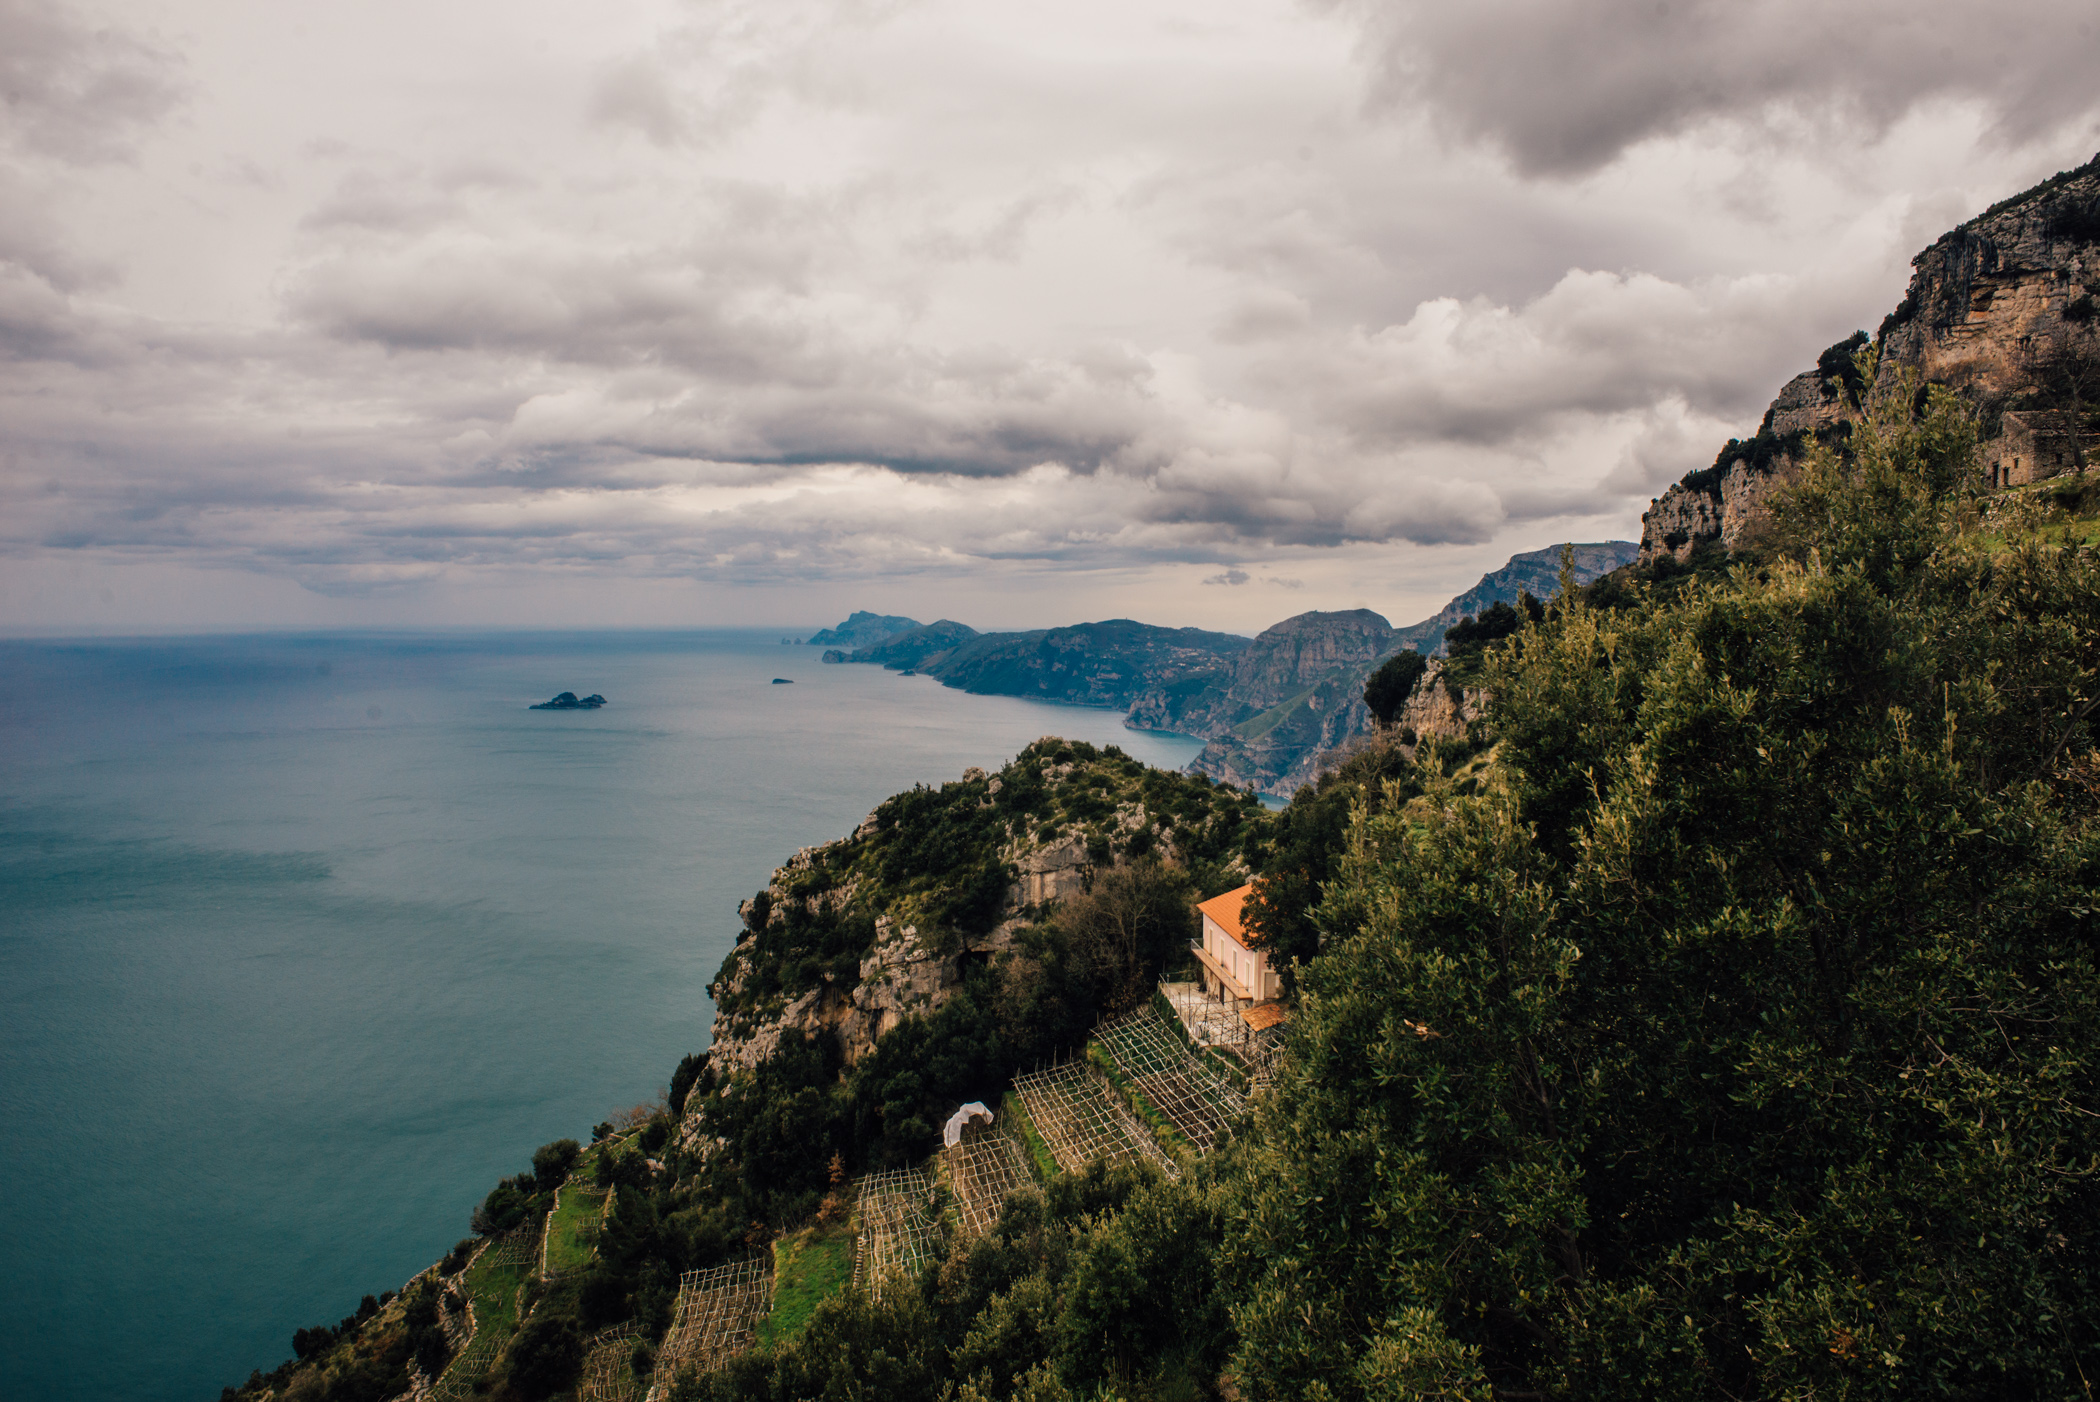 View from the Path of the Gods, Amalfi Coast.